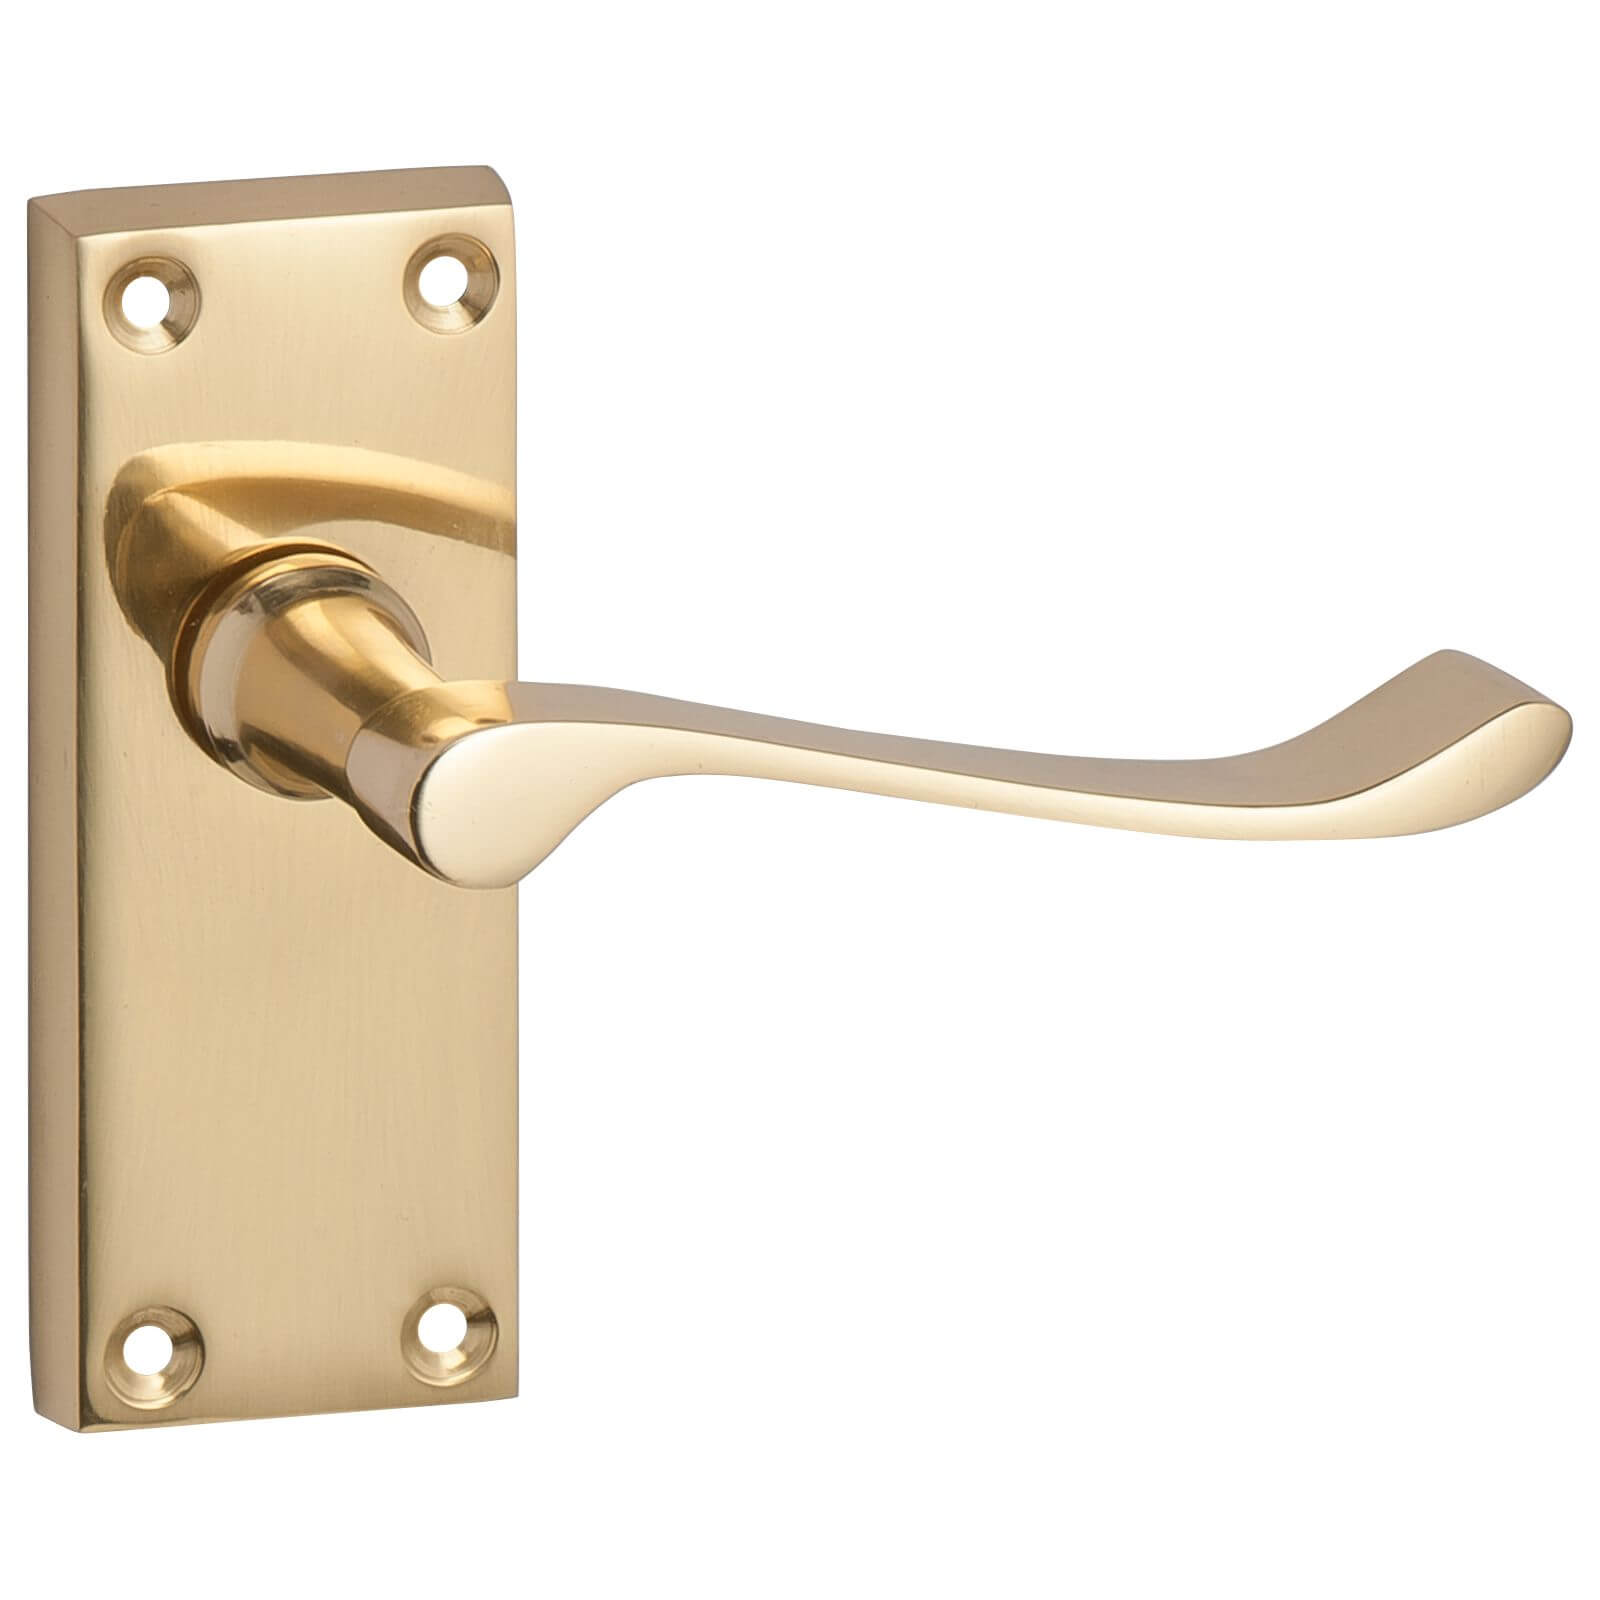 Victorian Scroll Lever Latch Door Handle - Polished Brass